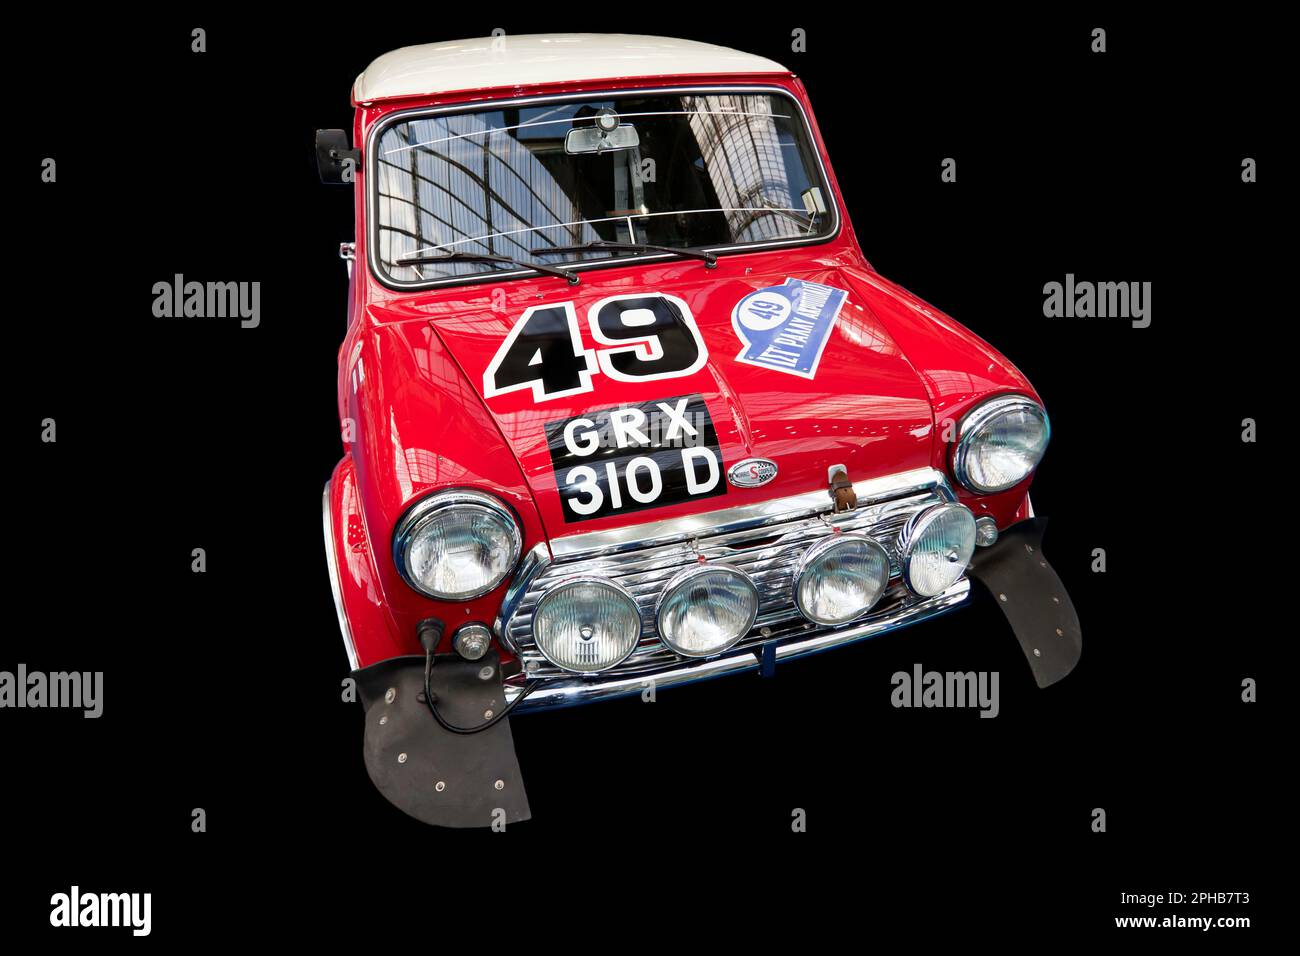 !966, Mini Cooper S Works Rally Car driven in period by Rauno Aaltonen, Henry Lidden, Timo Makinen and Paul Easter, Stock Photo